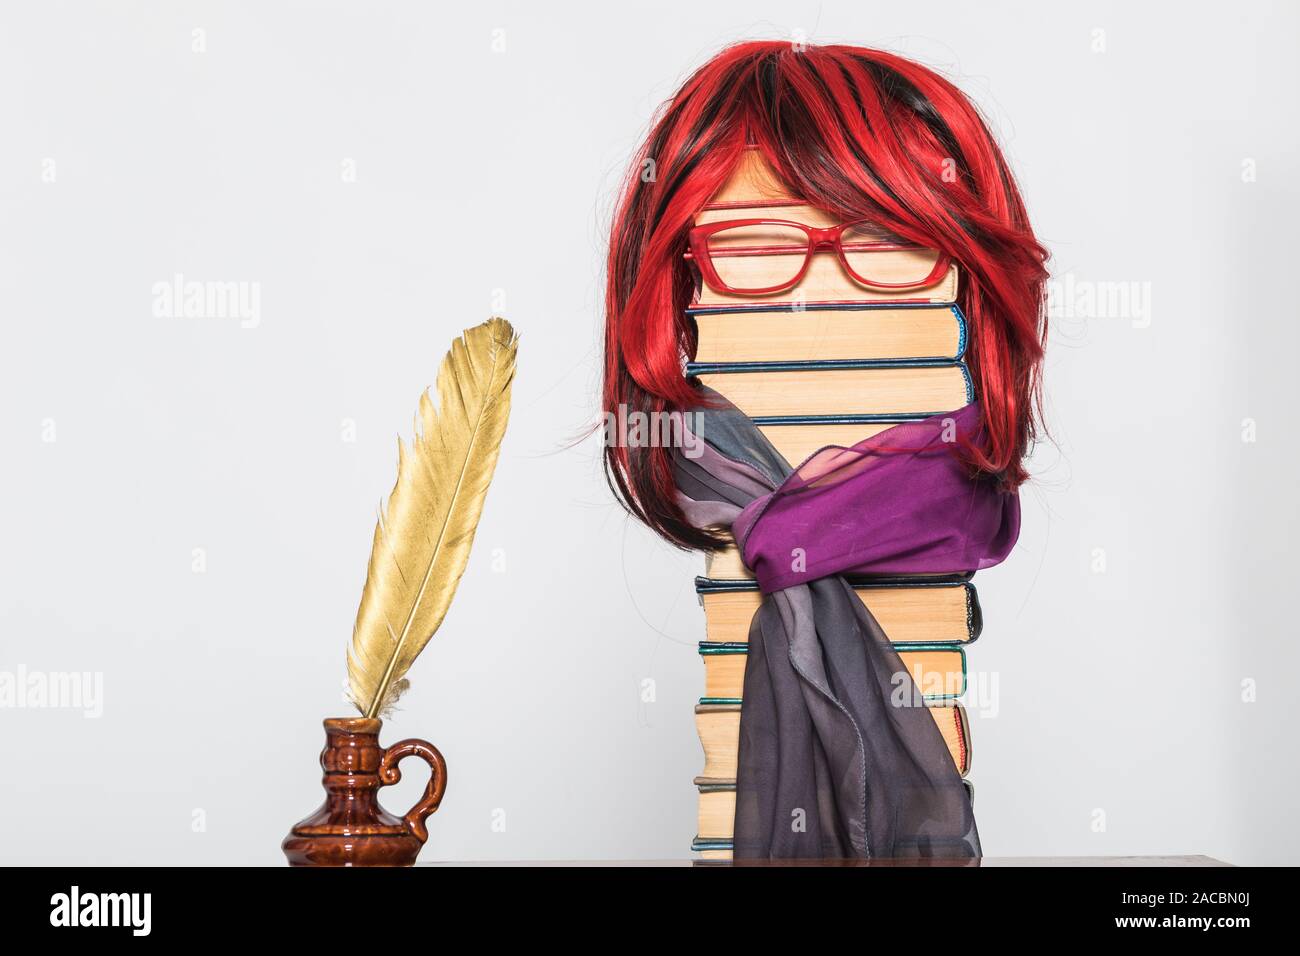 Funny education concept with beautiful teacher girl with luxurious red hair Stock Photo